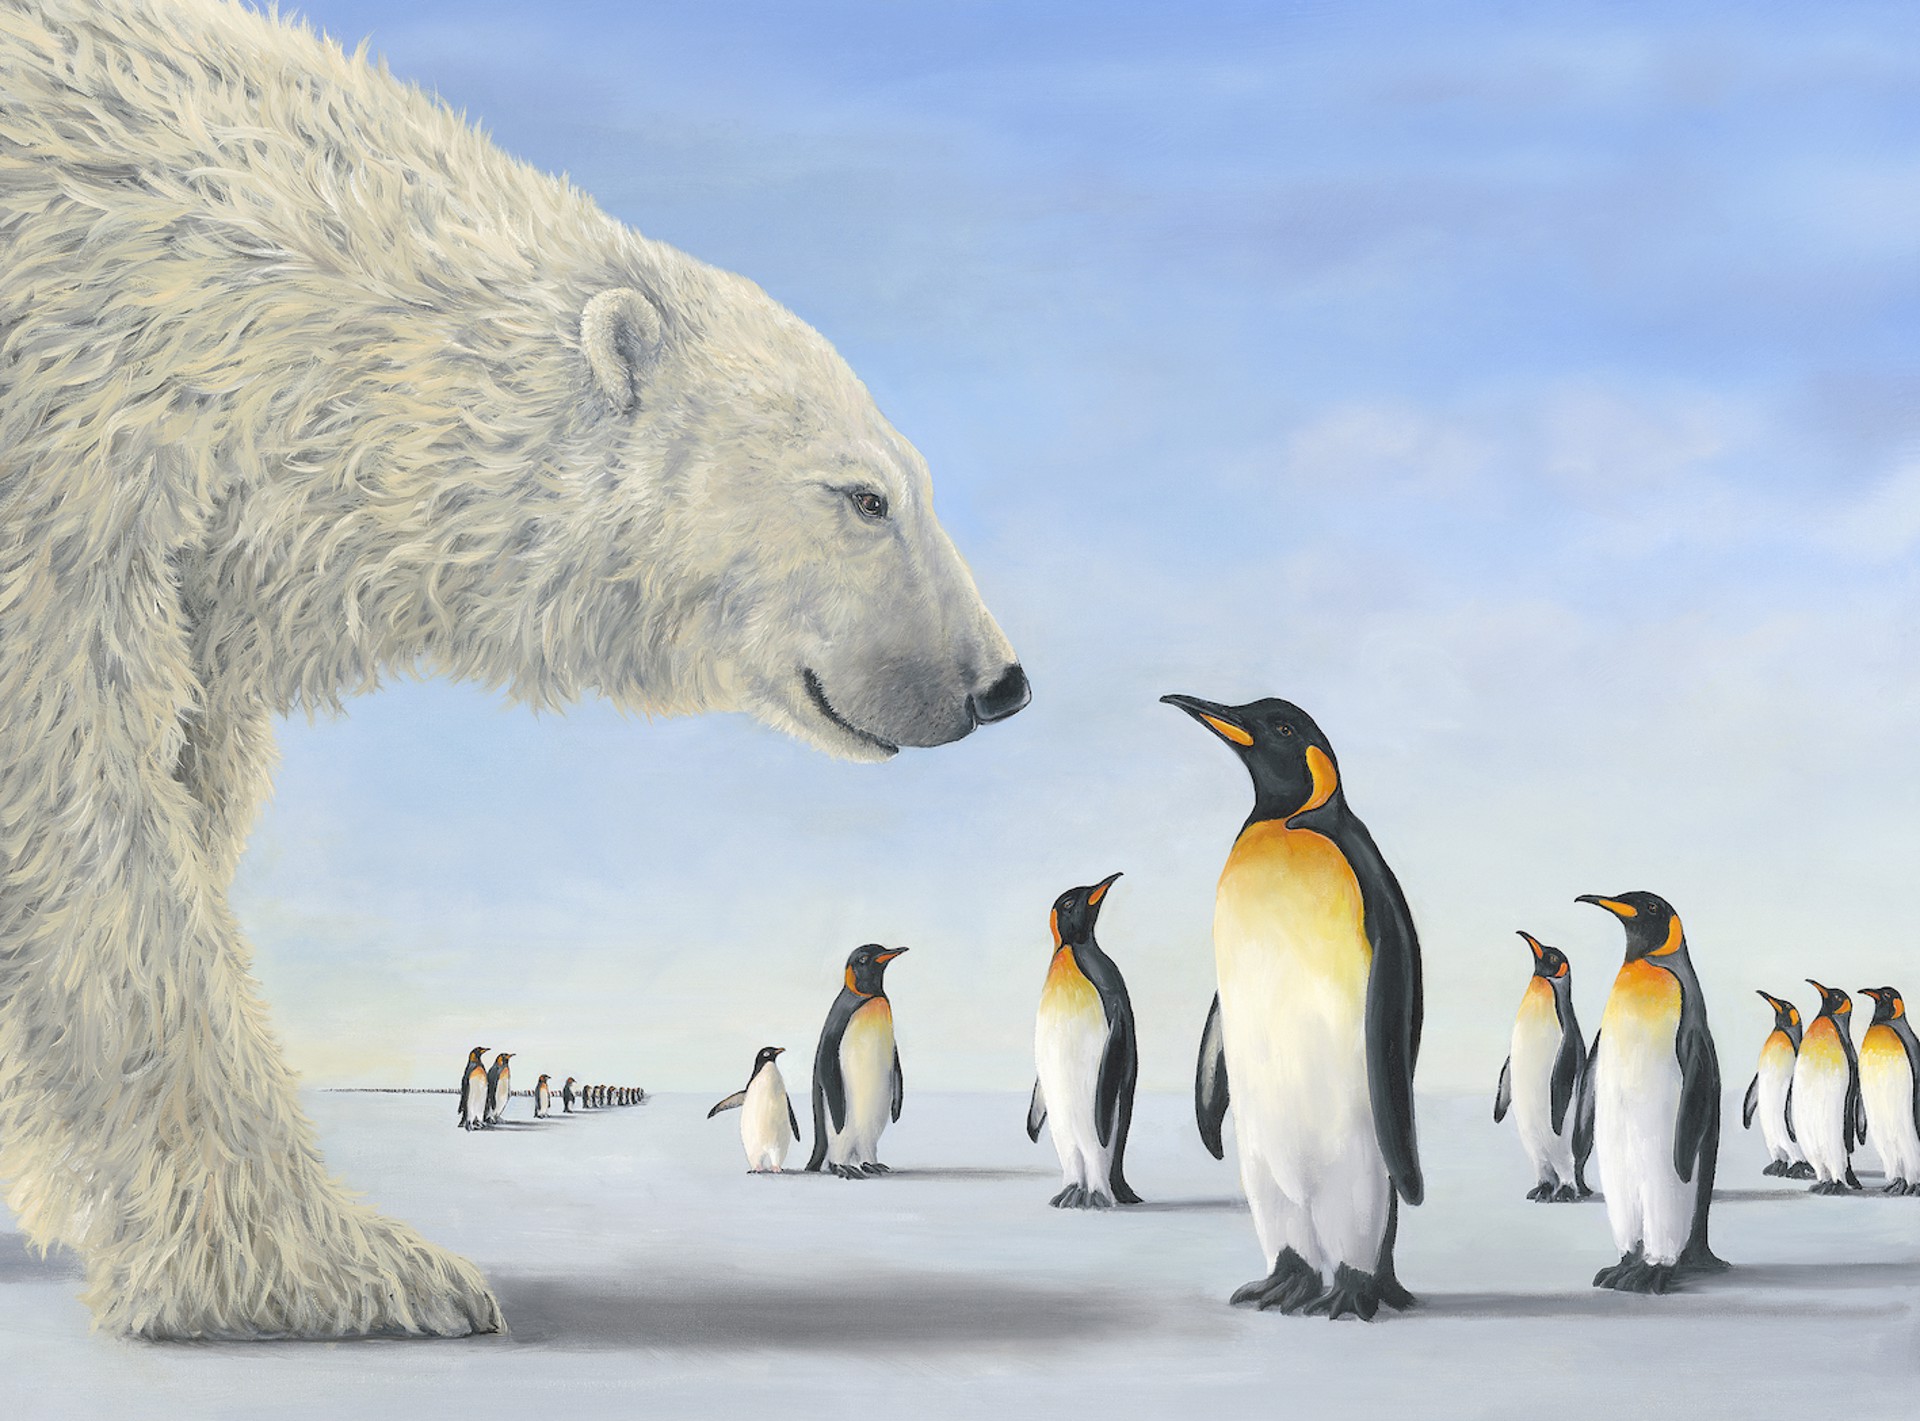 Meeting On The Ice by Robert Bissell